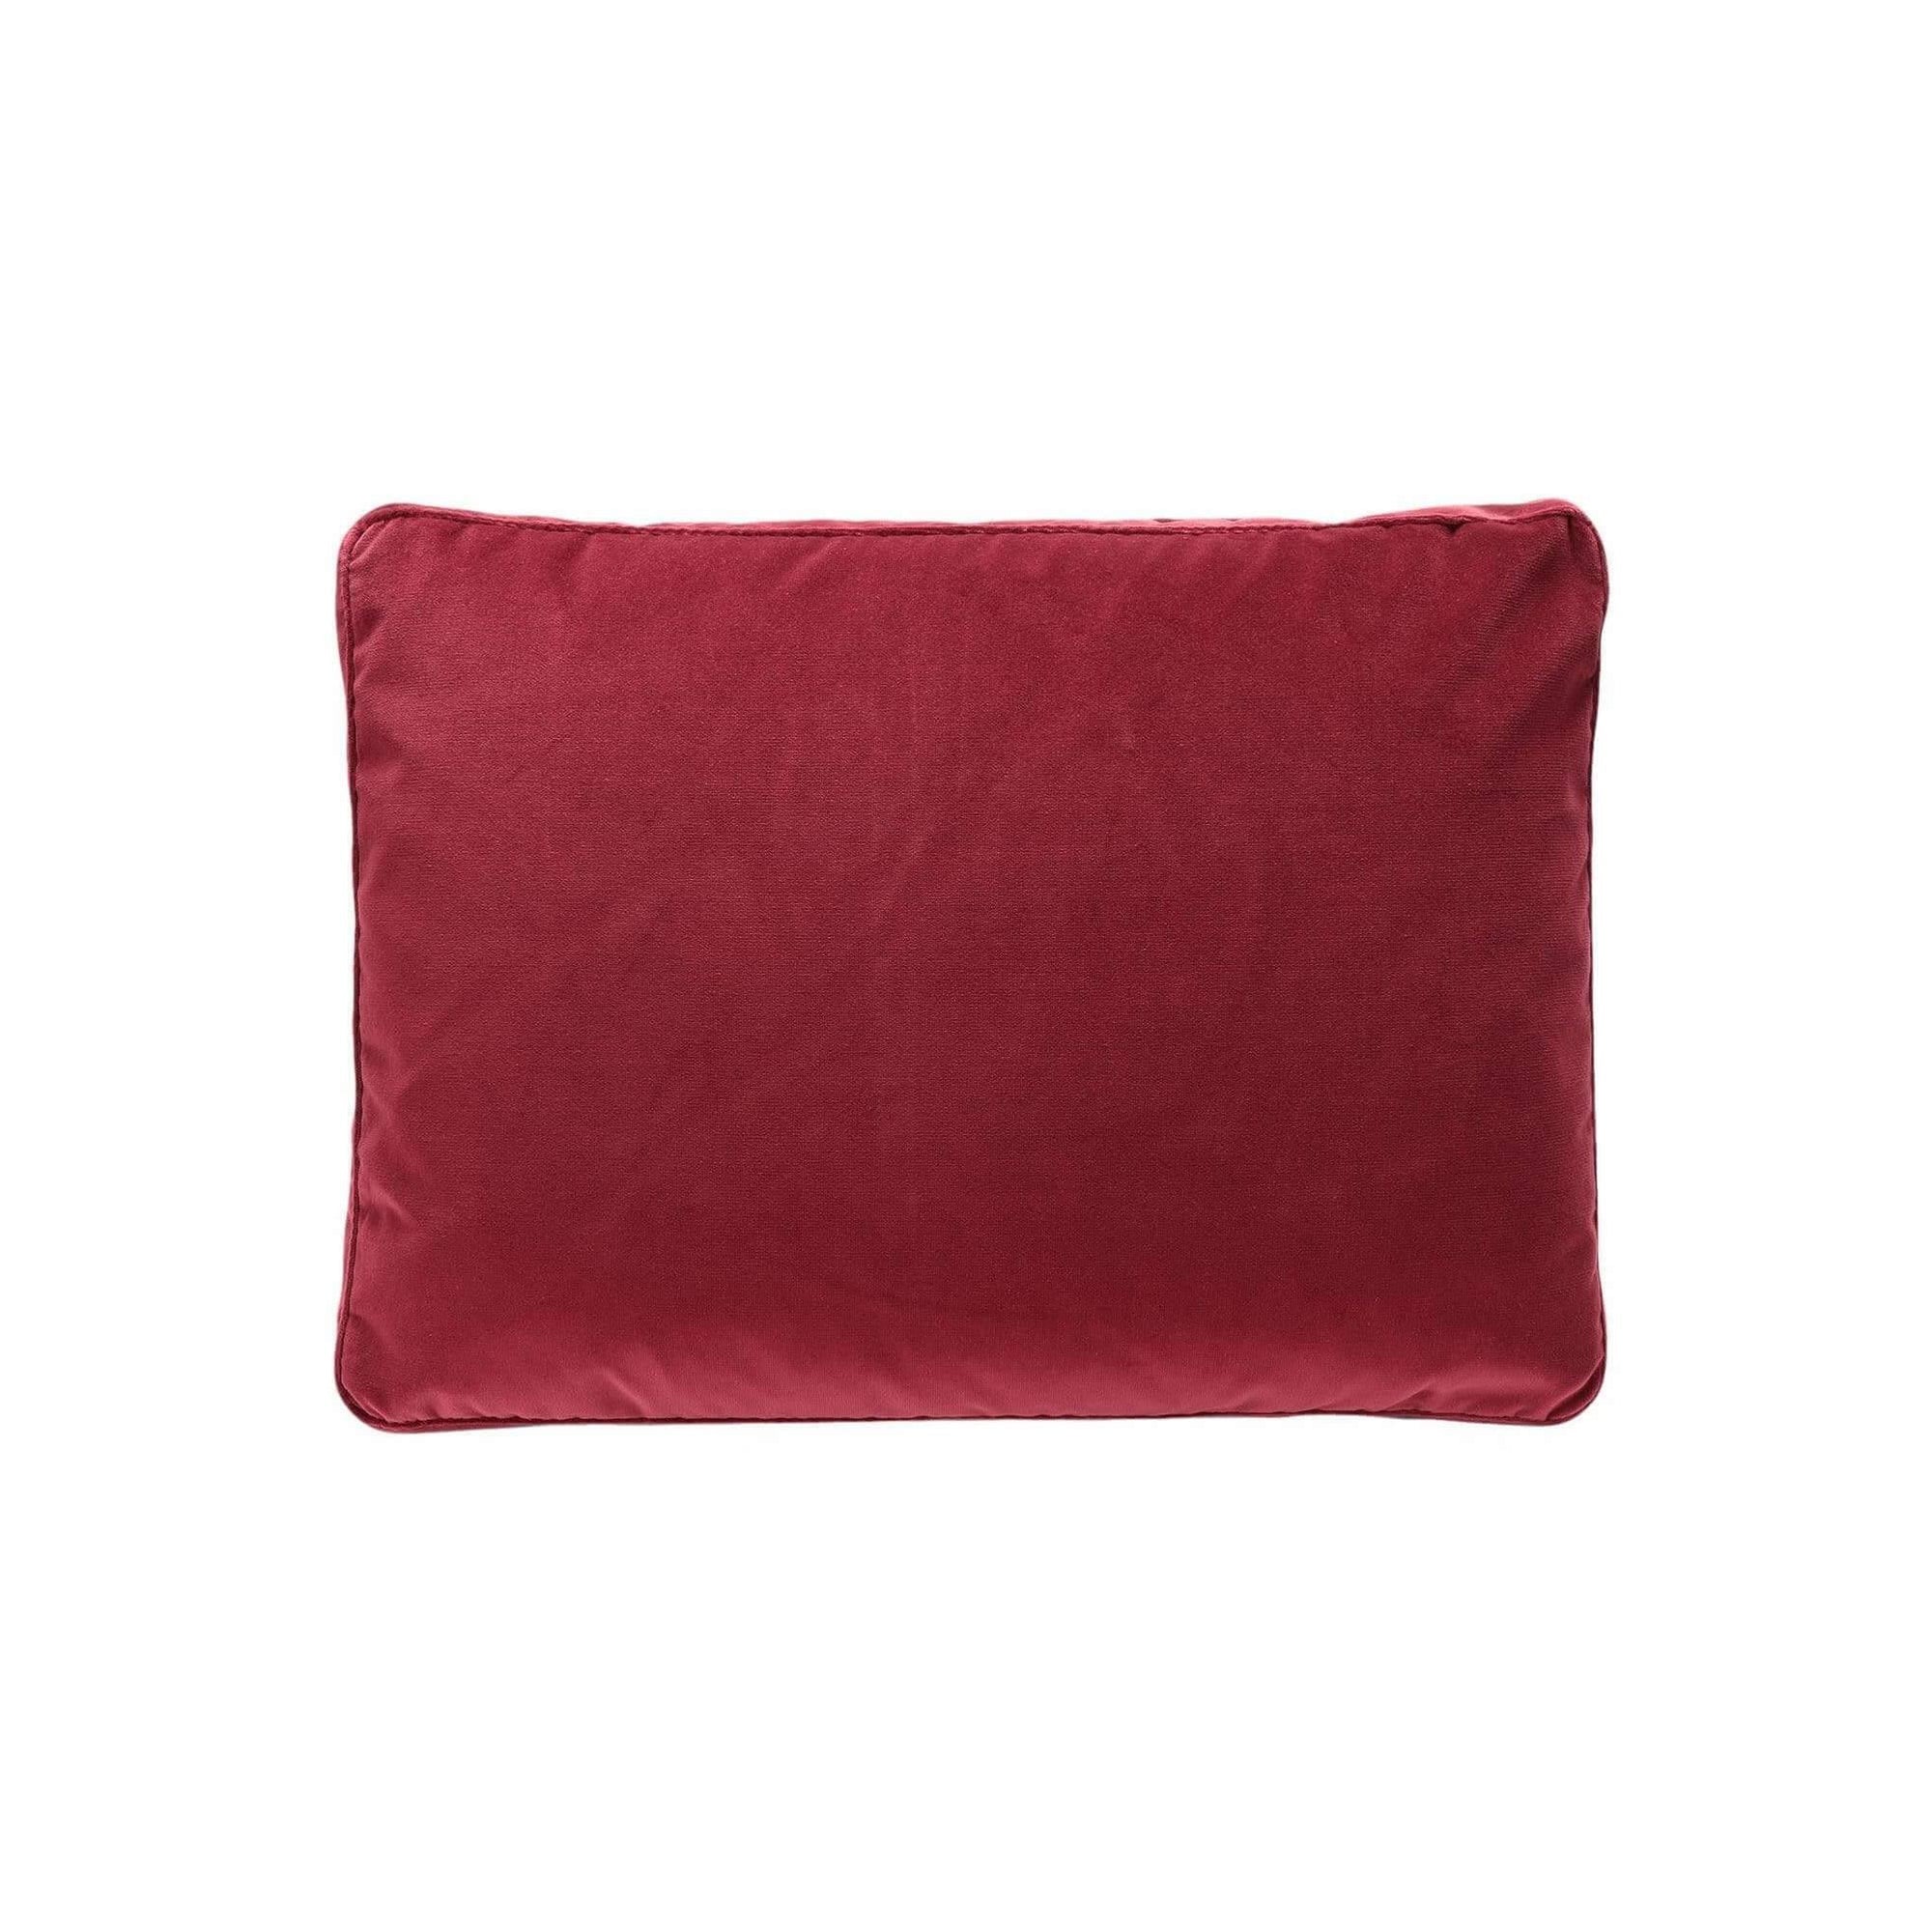 Largo 18X13" Pillow - Curated - Accessory - Kartell